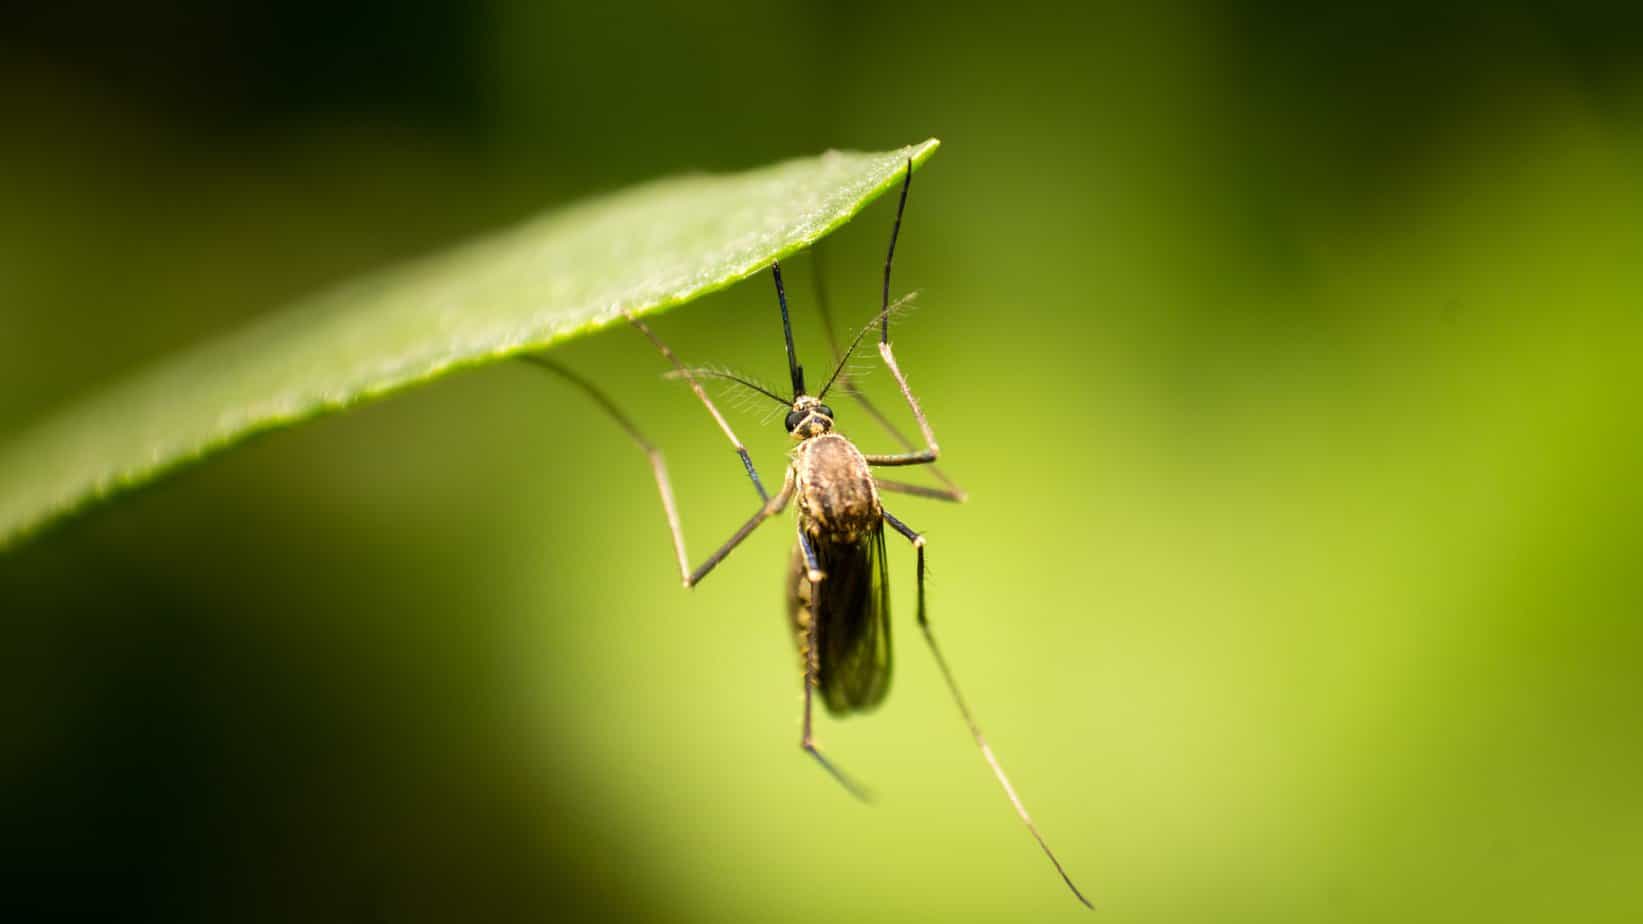 mosquito on a leaf, close-up